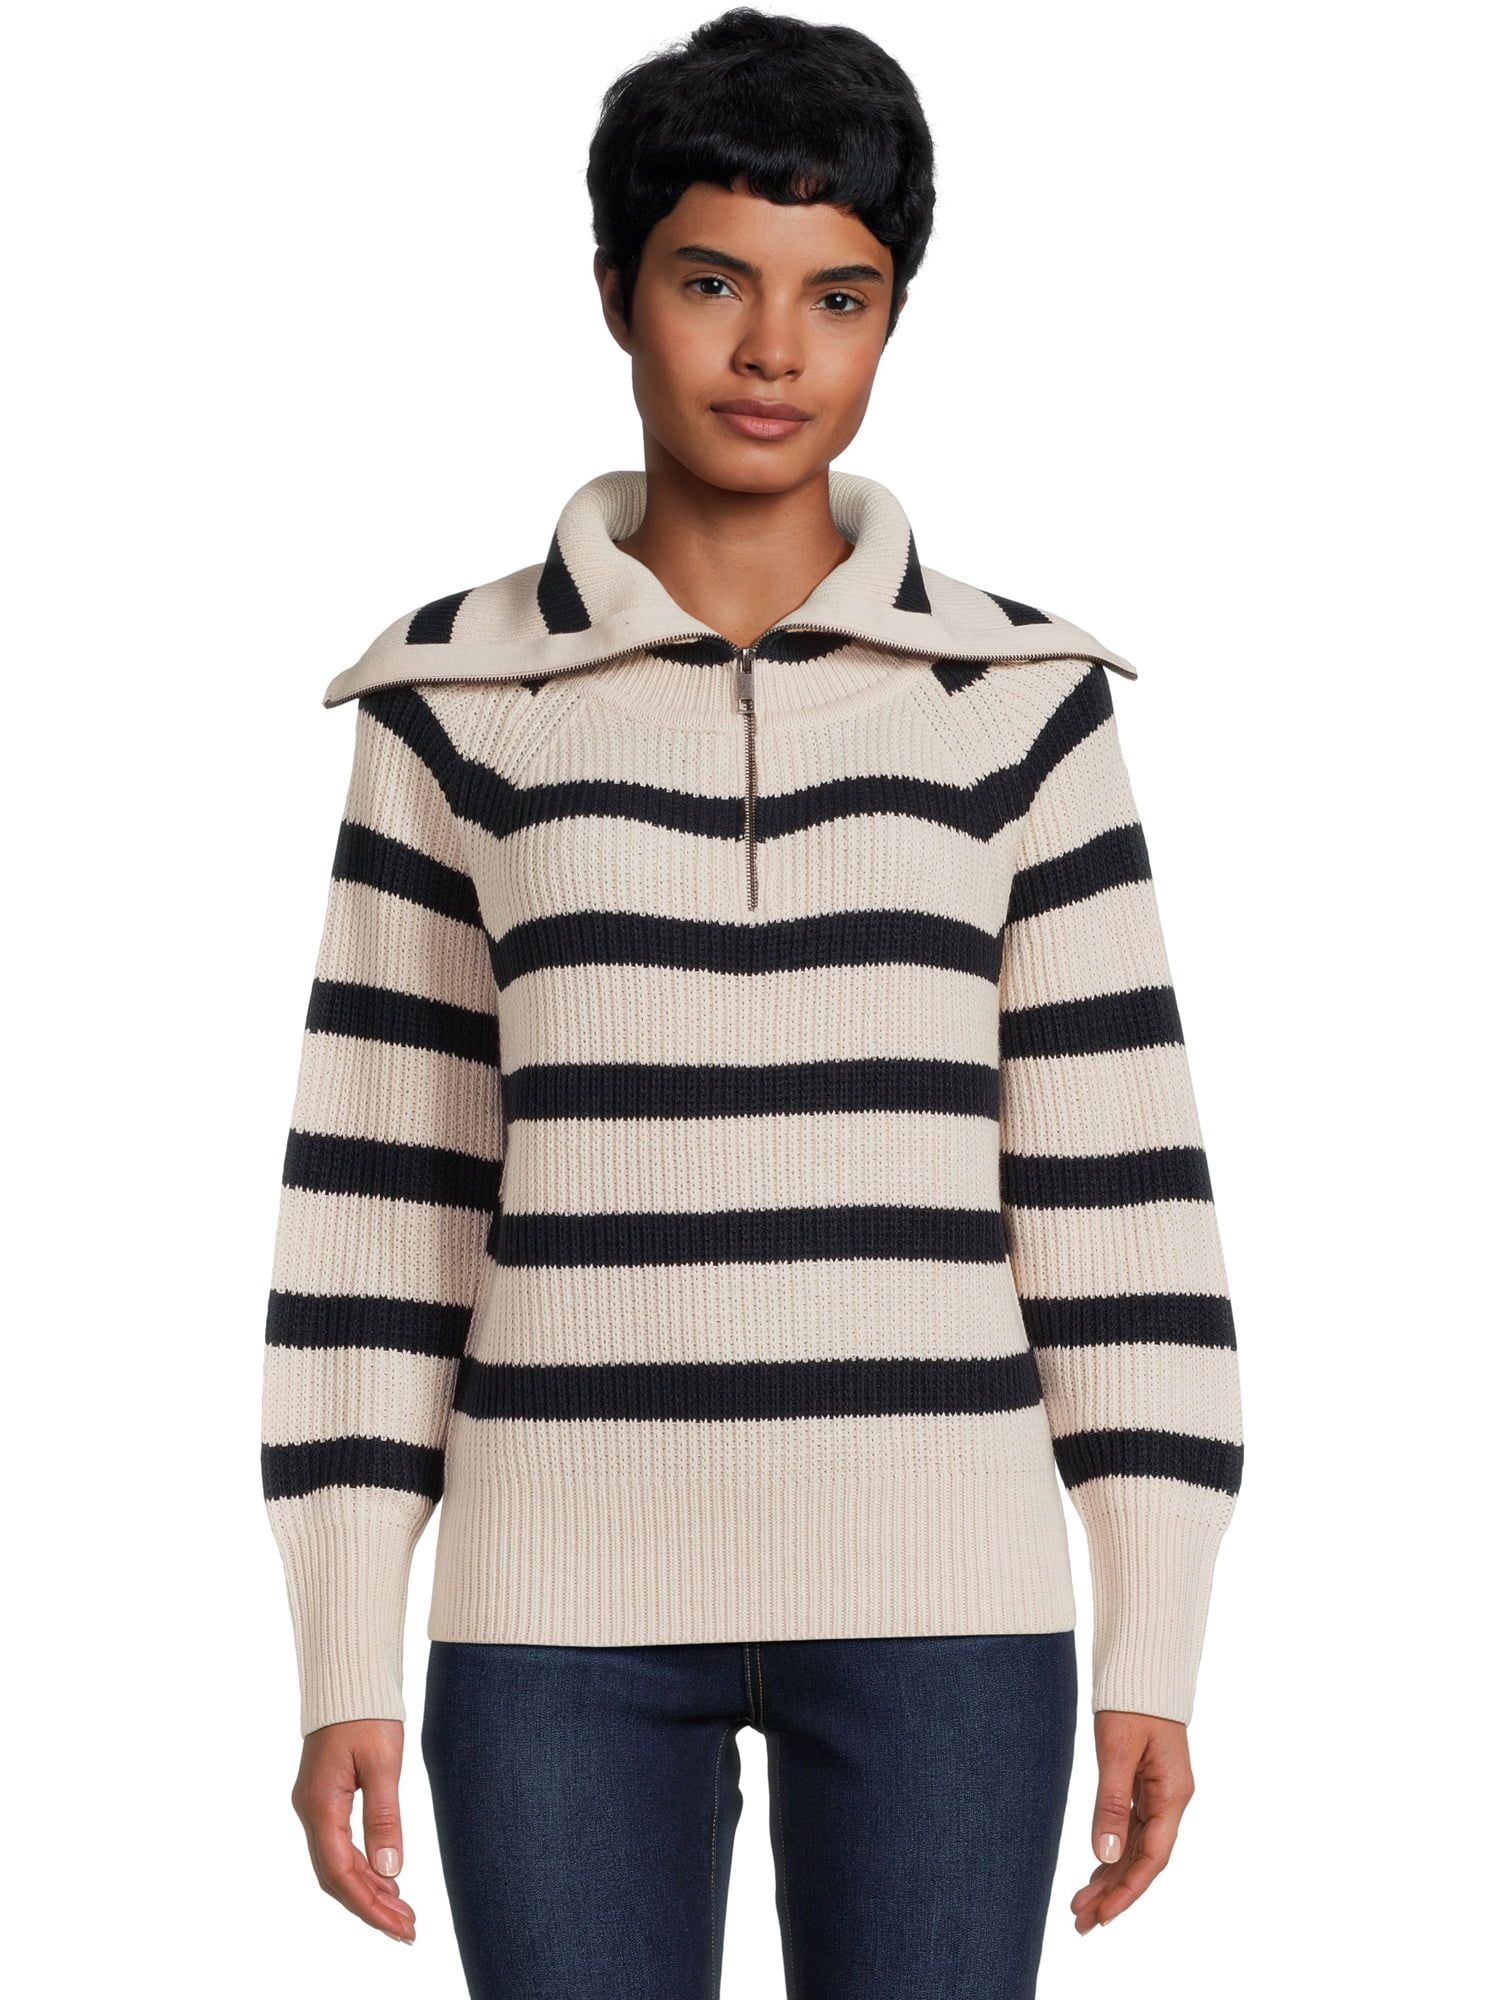 RD Style Women’s Quarter Zip Sweater with Extended Collar, Sizes XS-3XL | Walmart (US)